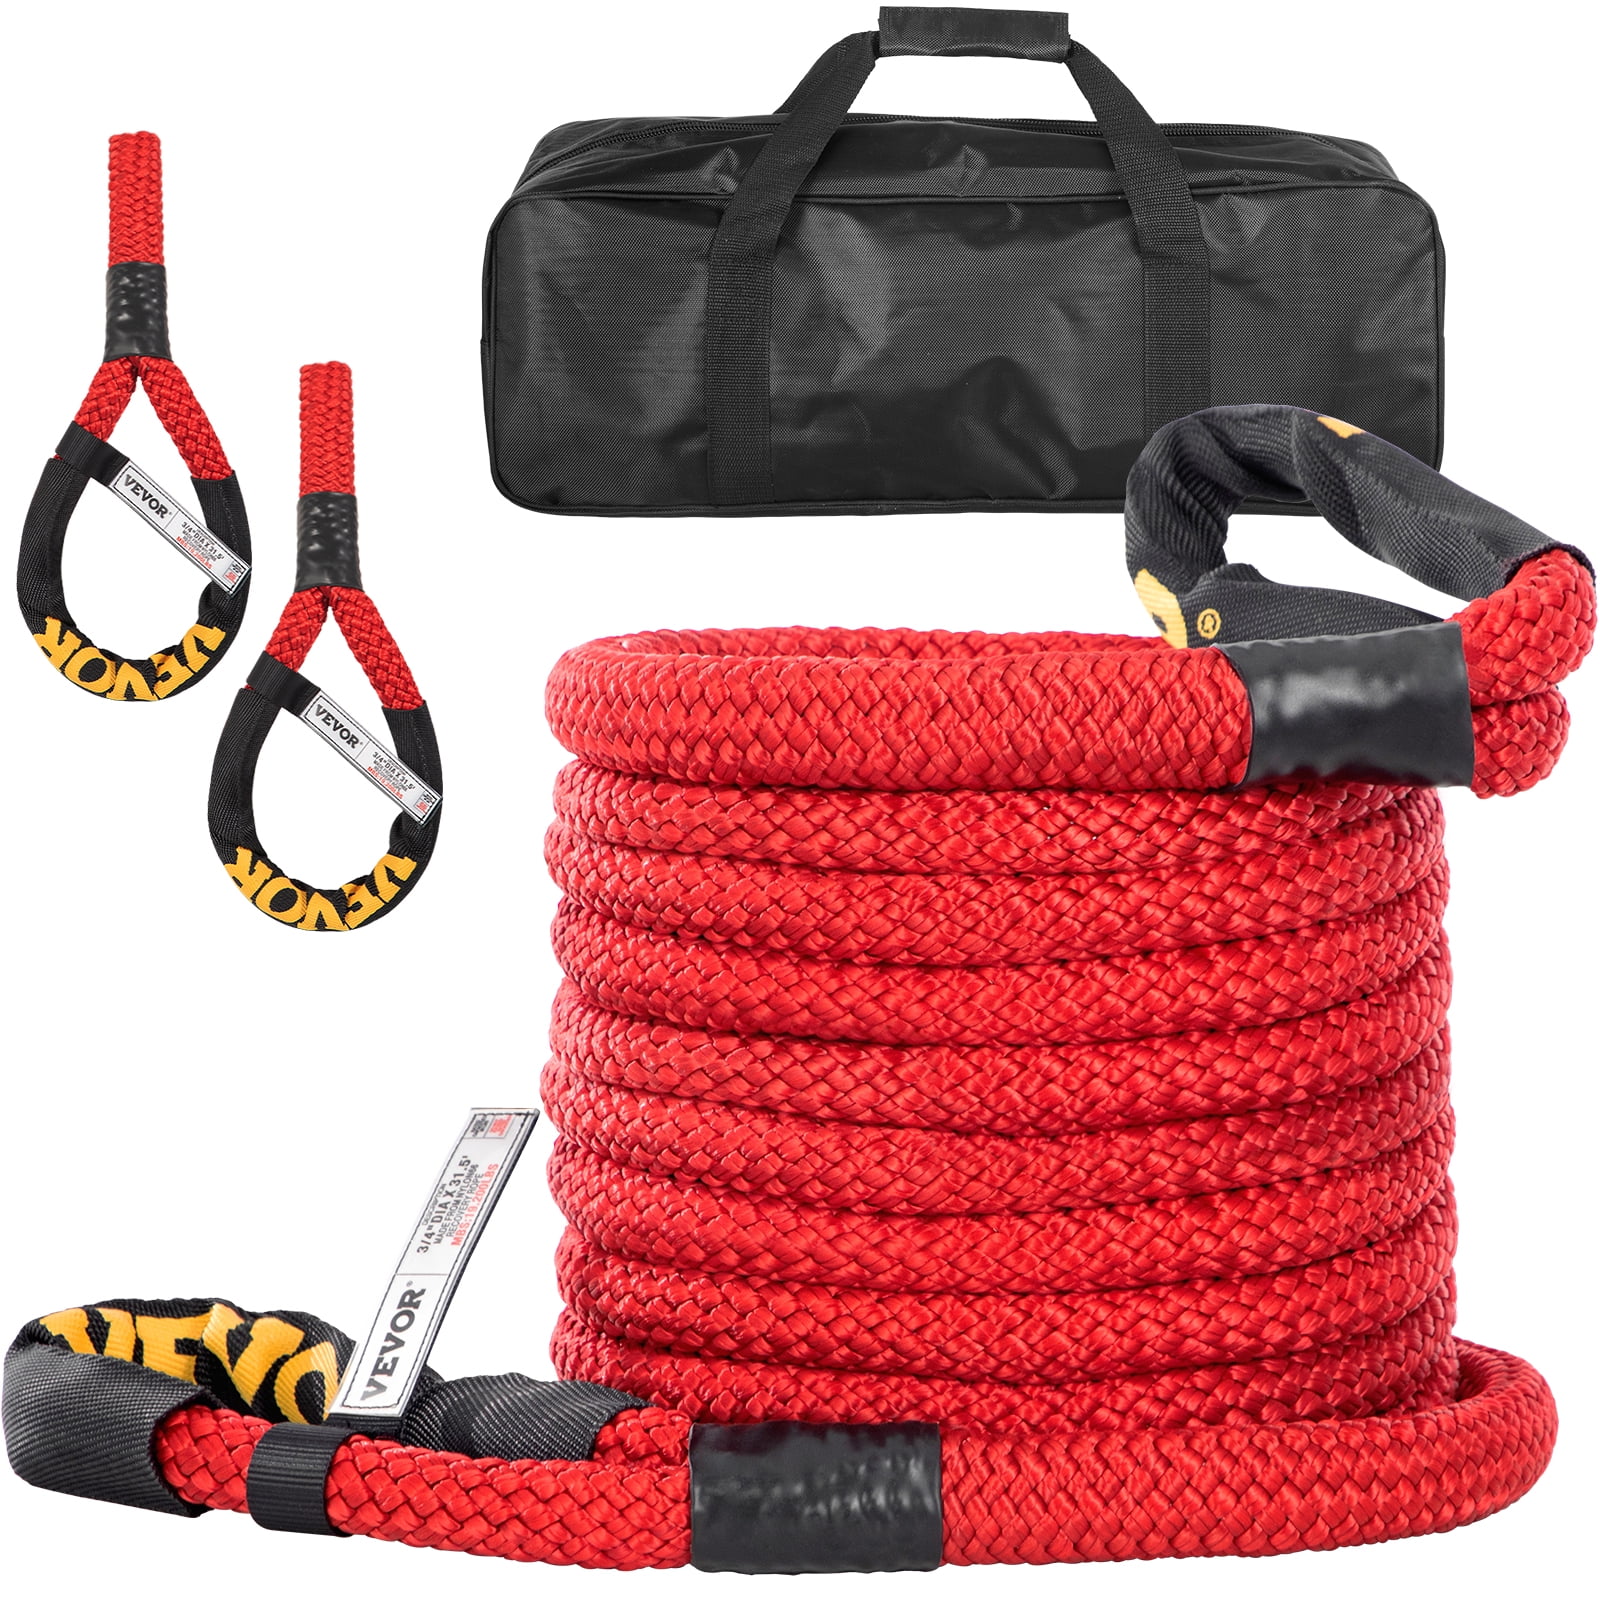 KKmoon 4m Tow Strap with Hooks,Car Vehicle Recovery Rope,Trailer Rope 11,023 lbs,Capacity Heavy Duty Tow Rope for Car Truck SUV 